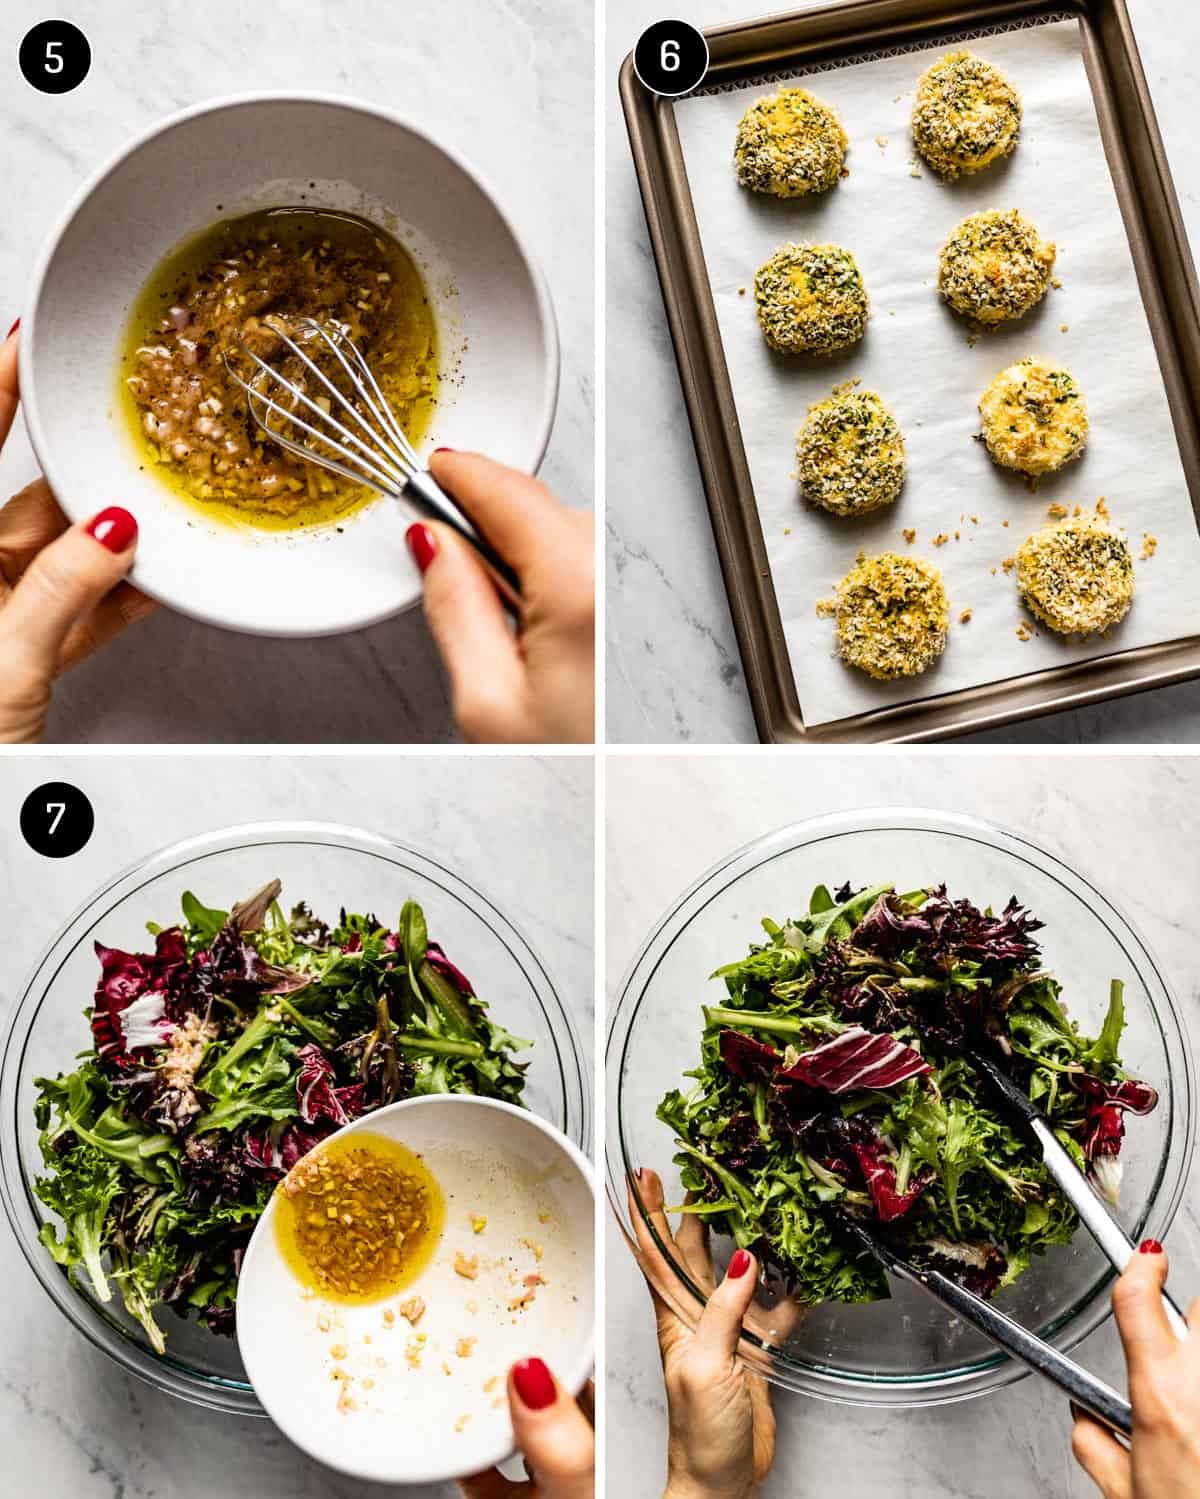 a collage of images showing how to make baked goat cheese salad.